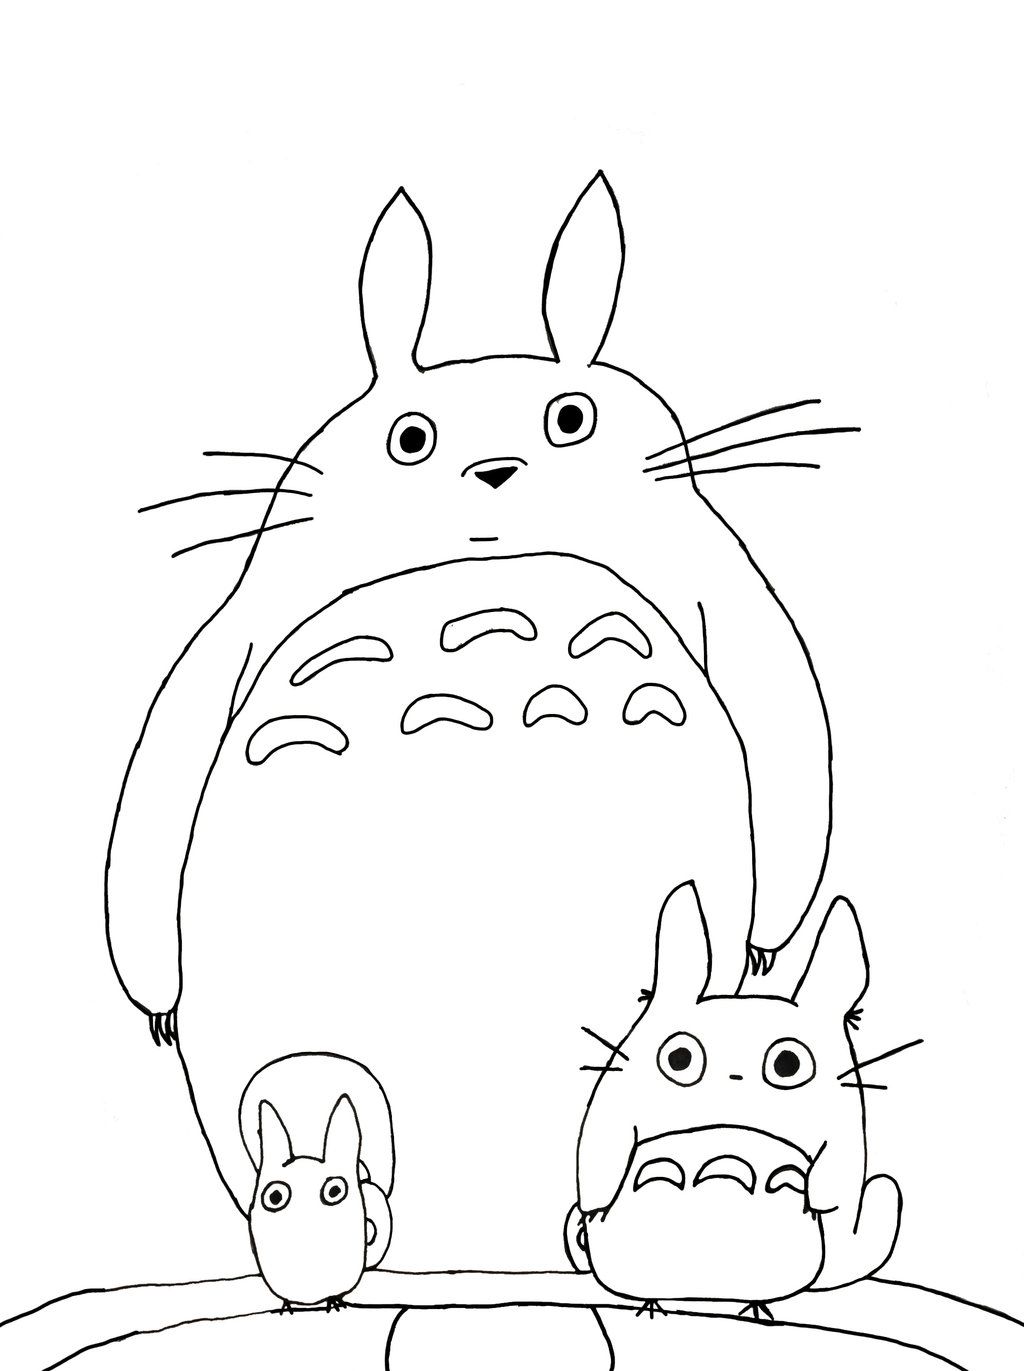 Totoro | Free Coloring Pages on Masivy World